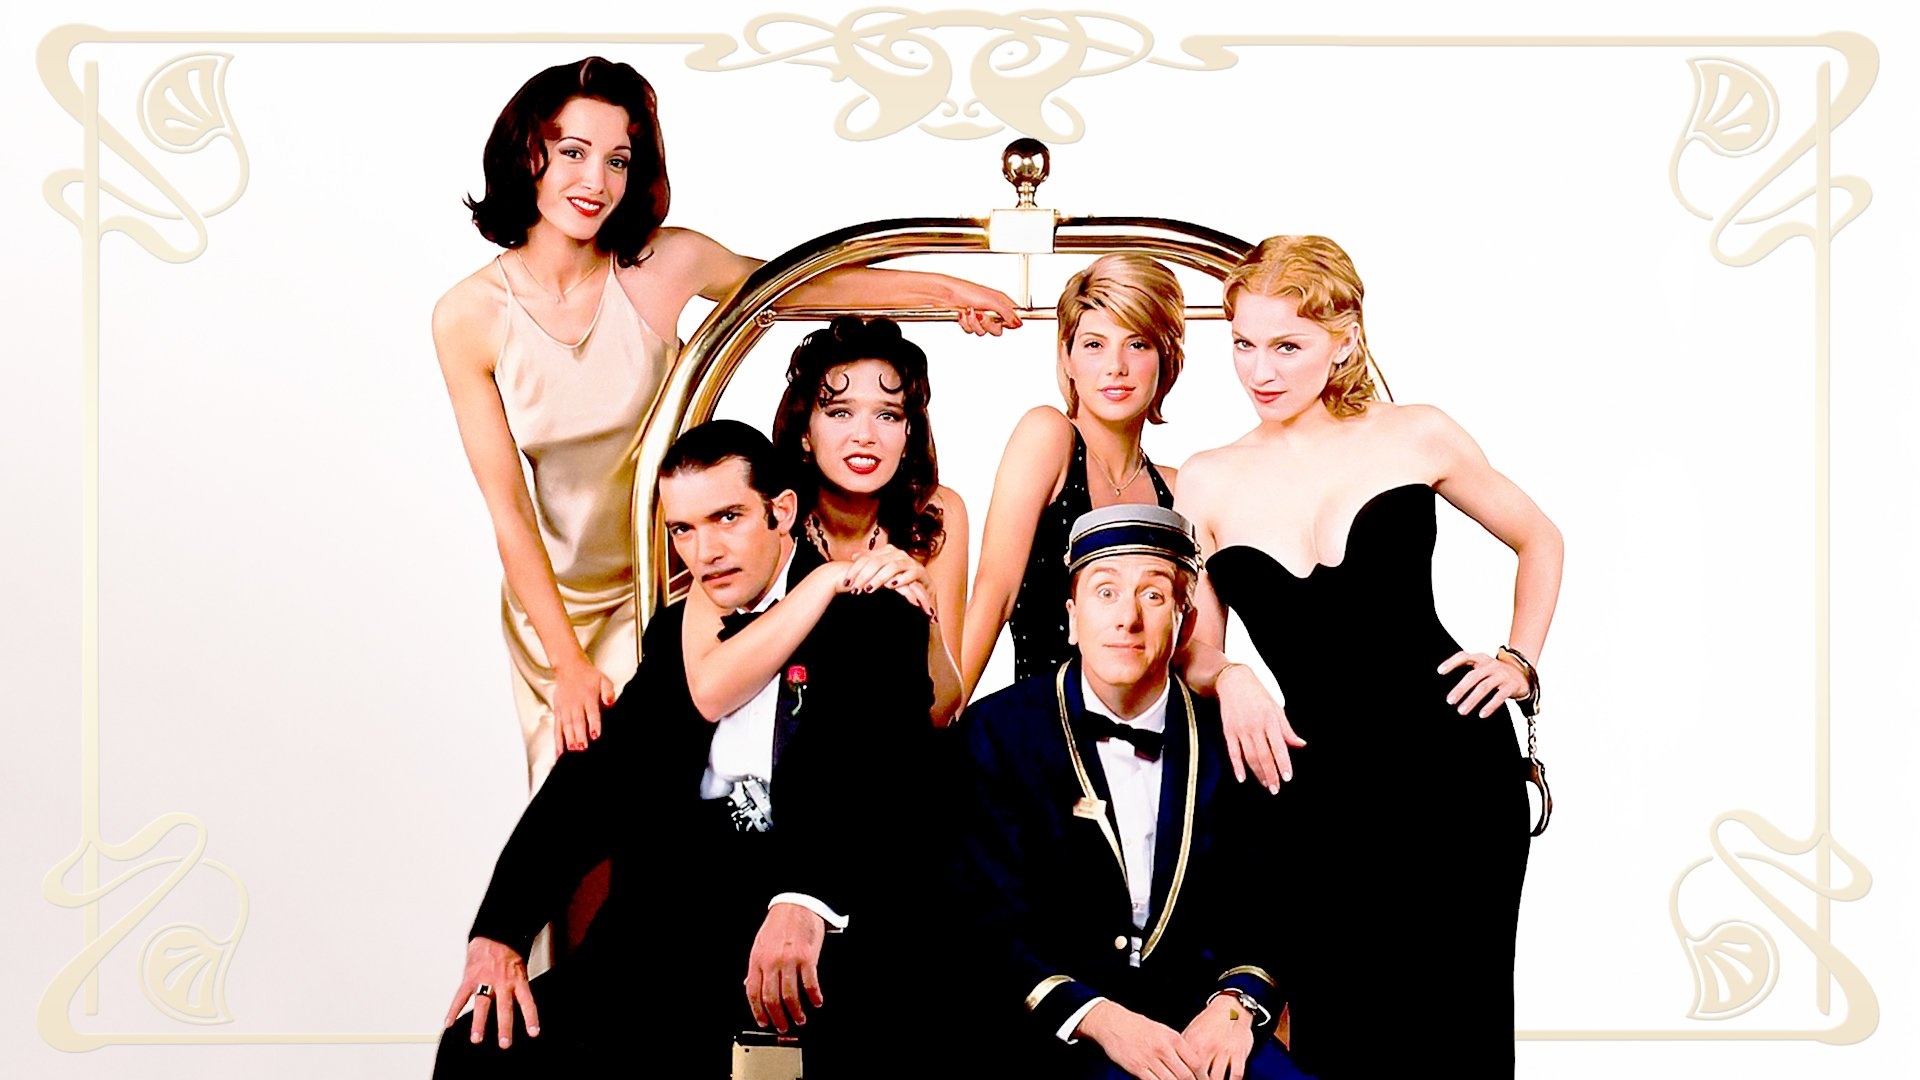 Four Rooms, Quirky comedy, Wild misadventures, Unexpected twists, 1920x1080 Full HD Desktop